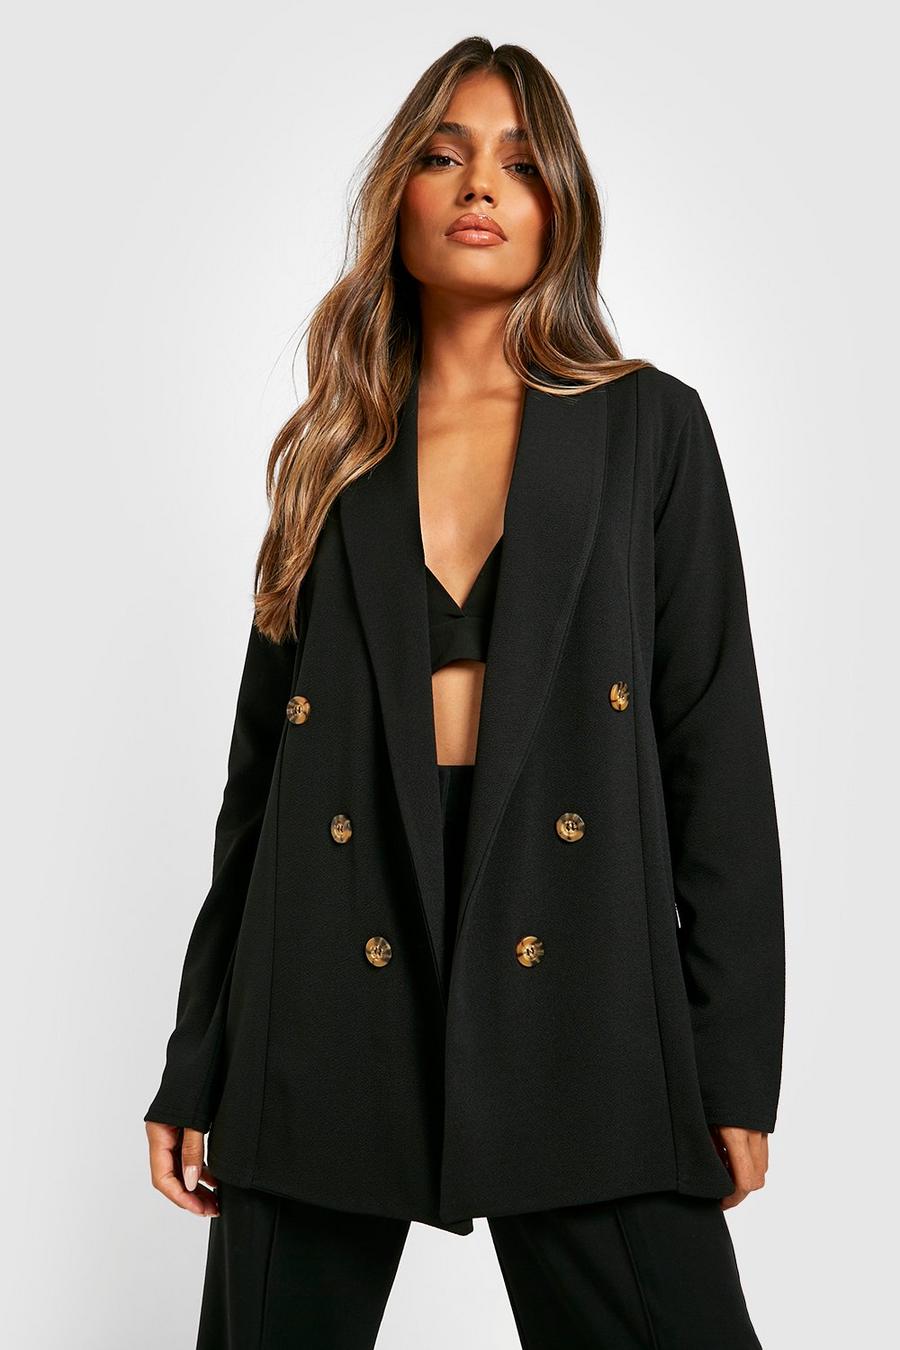 Black Basic Jersey Knit Relaxed Fit Blazer